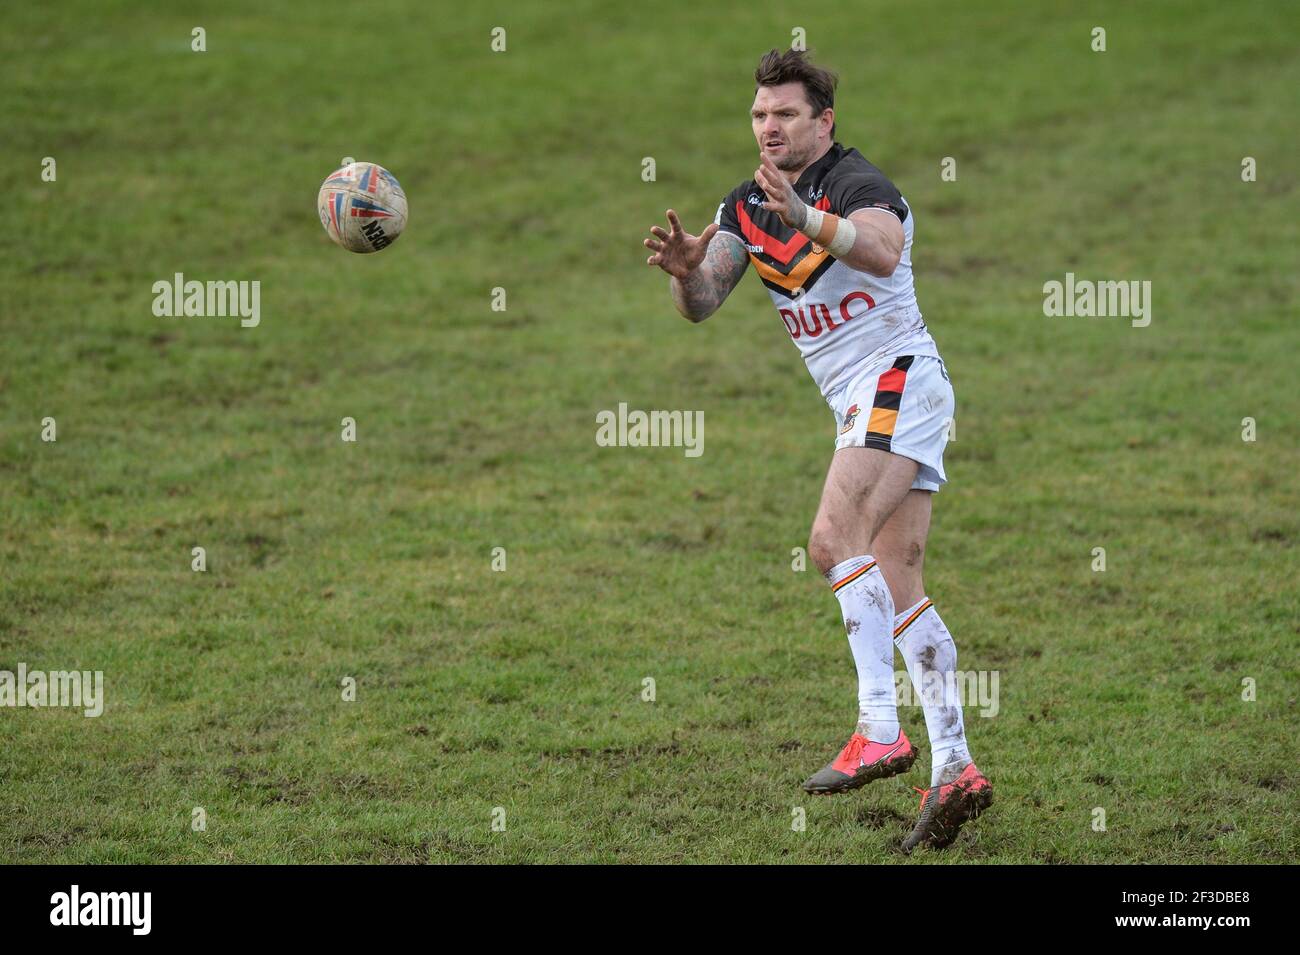 Danny Brough of Bradford Bulls in action during the game Stock Photo